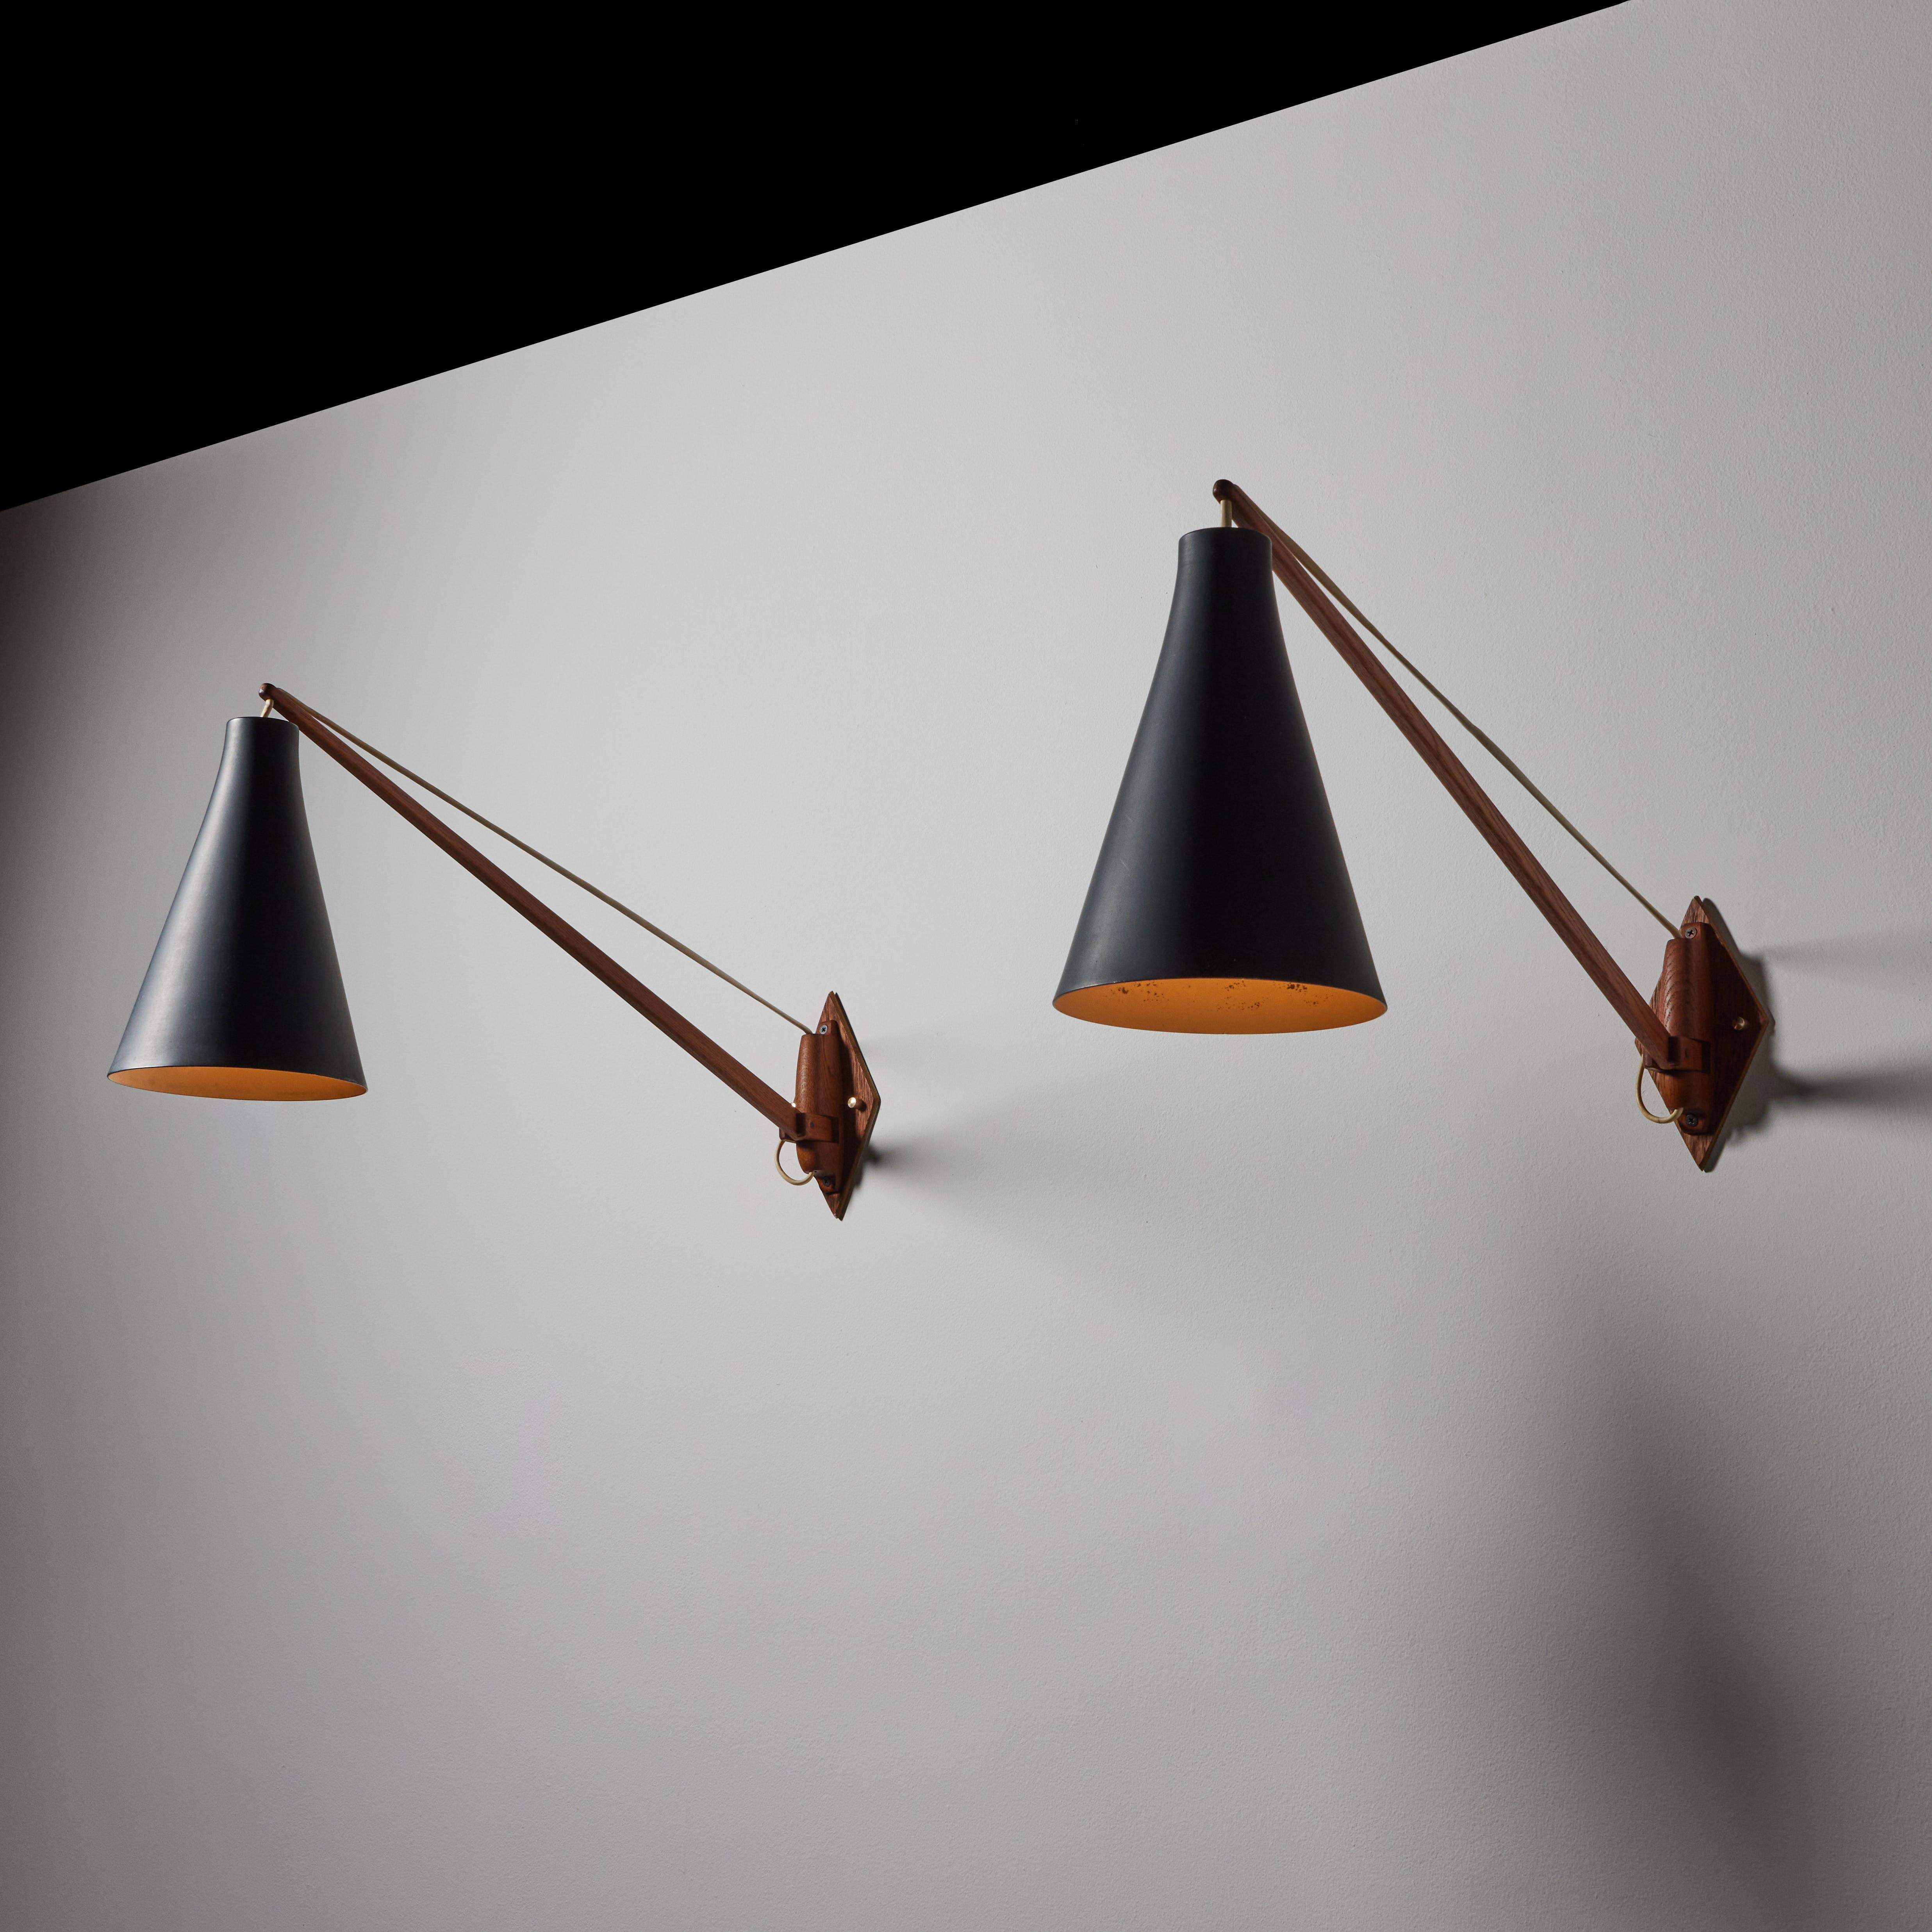 Pair of wall lights by Uno and Östen Kristiansson for Luxus. Designed and manufactured in Sweden, circa 1950's. Enameled metal, teak wood. Rewired for U.S. standards. adjustable shades. We recommend two E14 60w maximum bulbs per fixture. Bulbs not